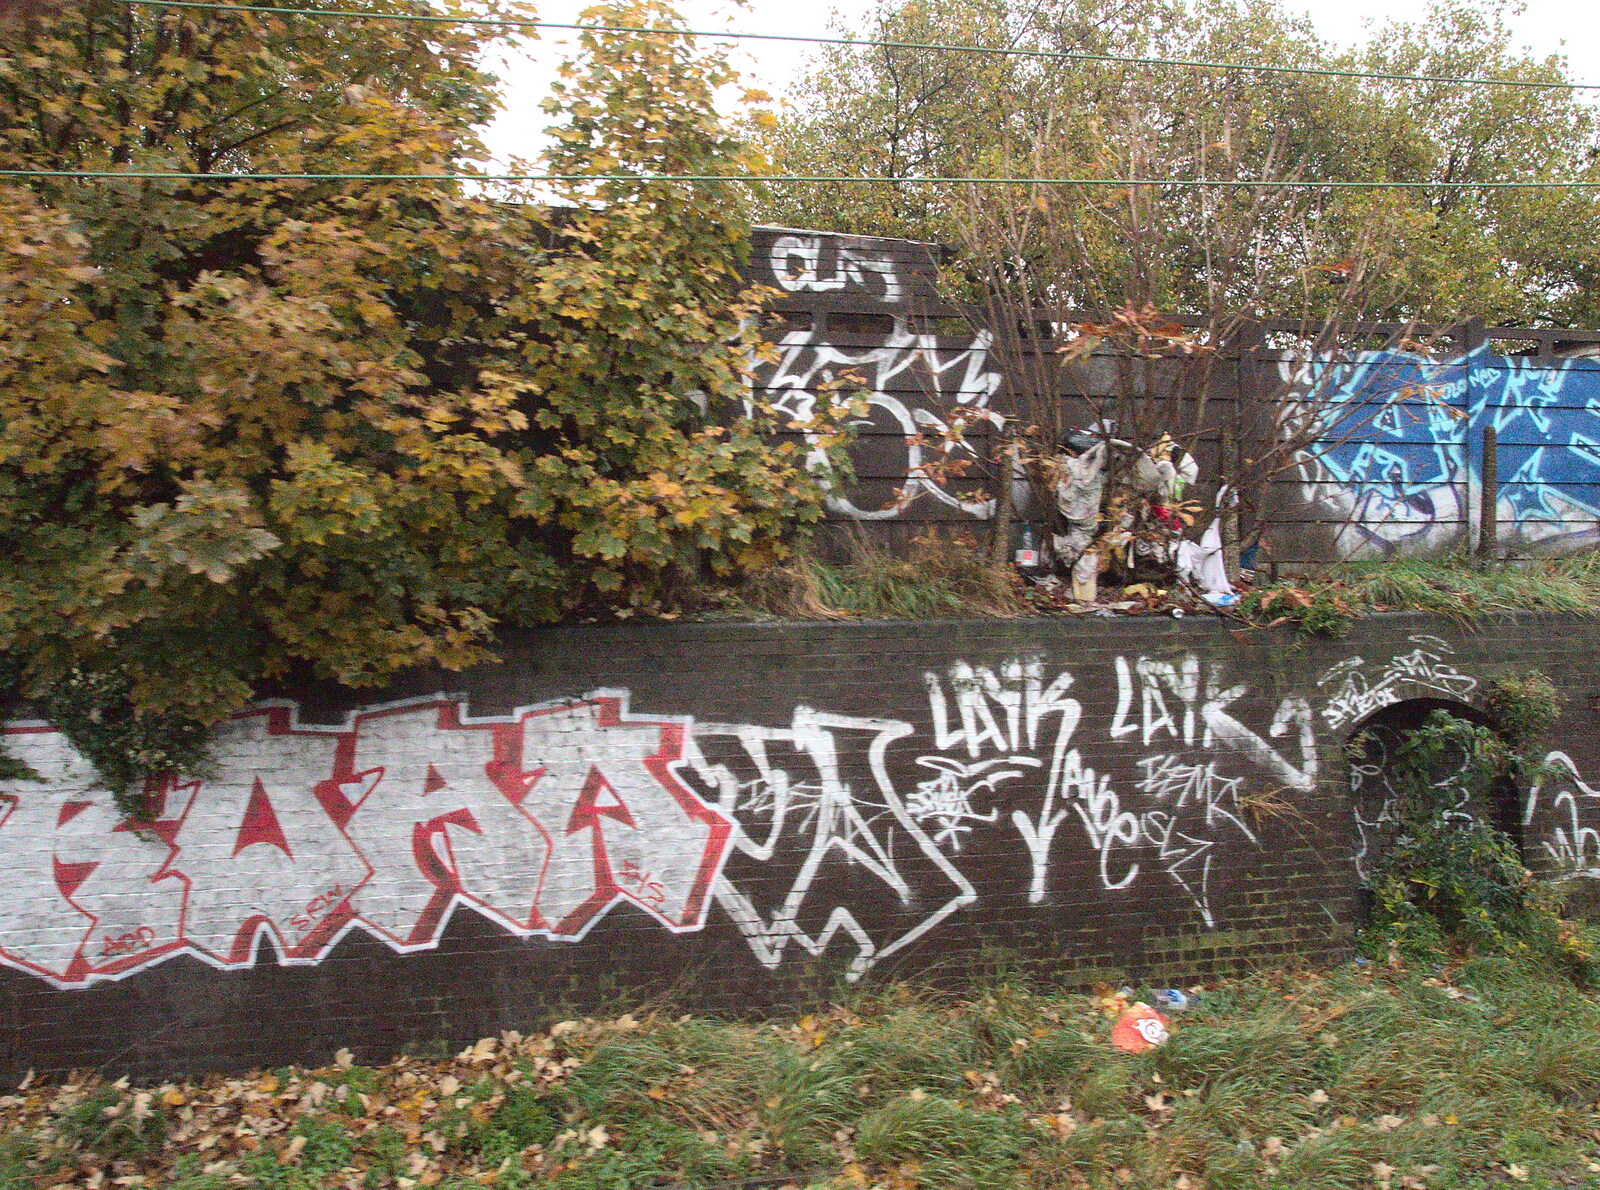 More tags by the railway line from Fred's Gyrobot, Brome, Suffolk - 18th October 2015